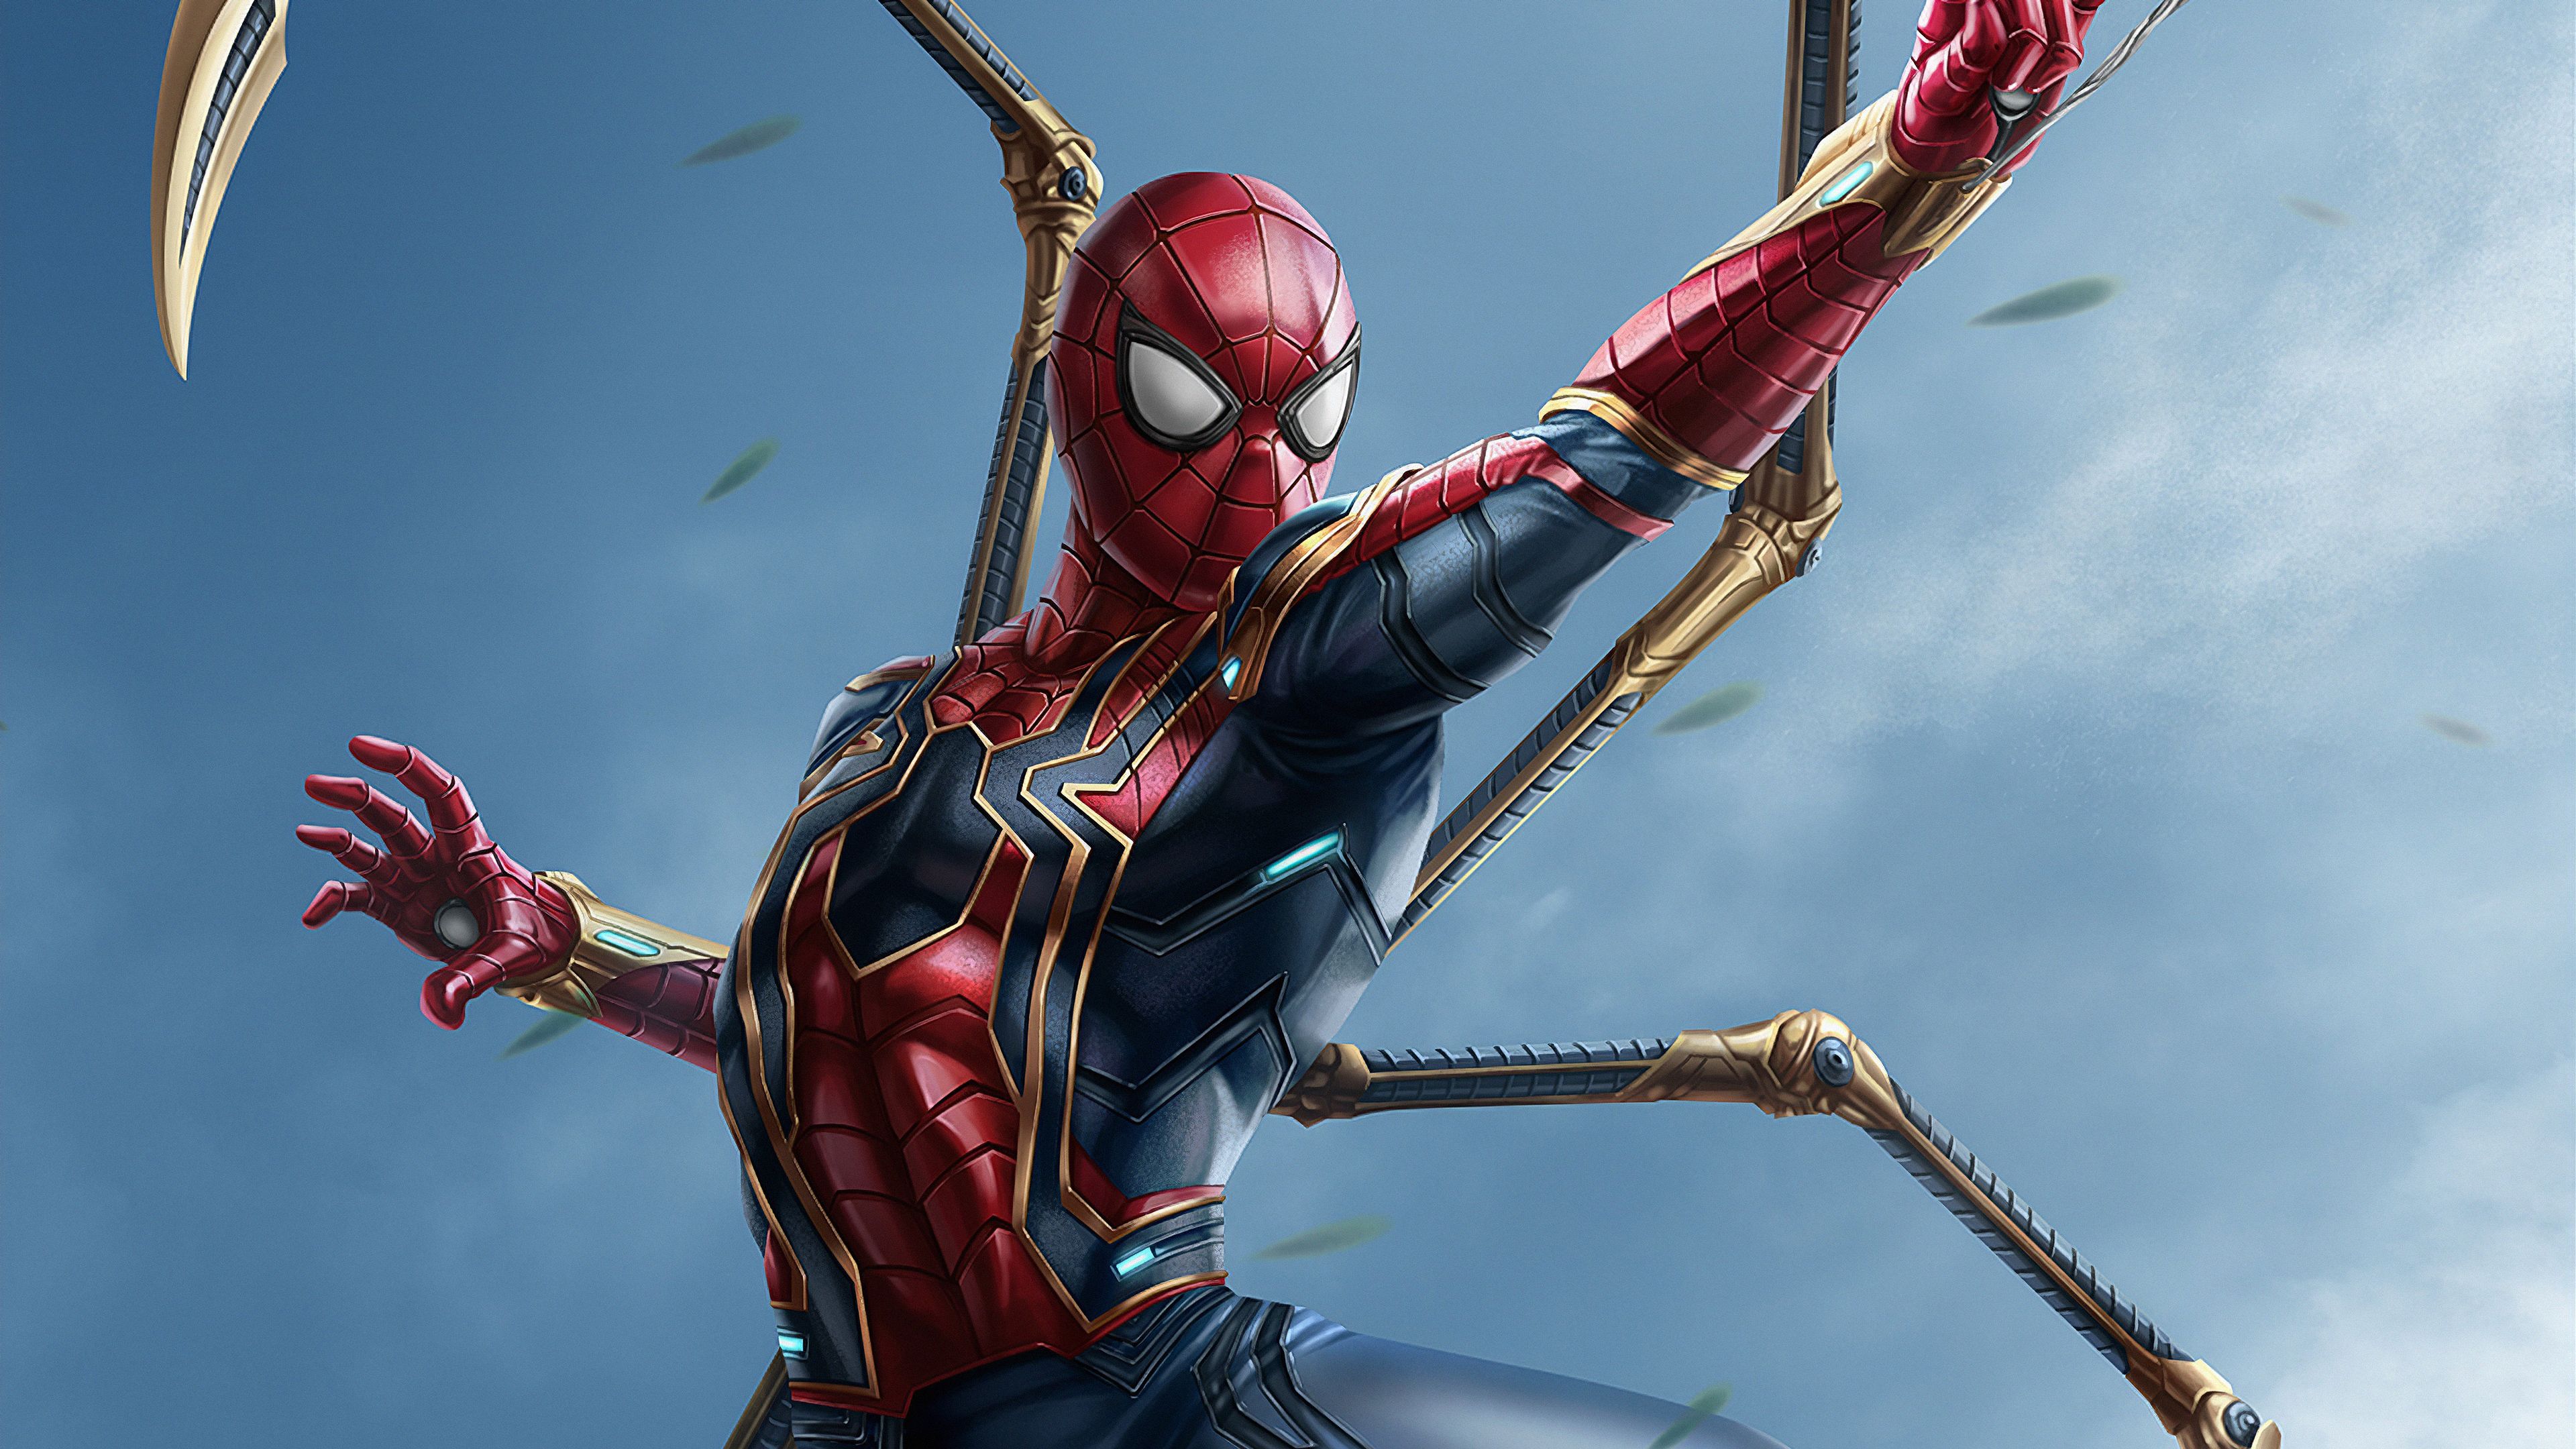 Tons of awesome Iron Spider-Man 4k wallpapers to download for free. 